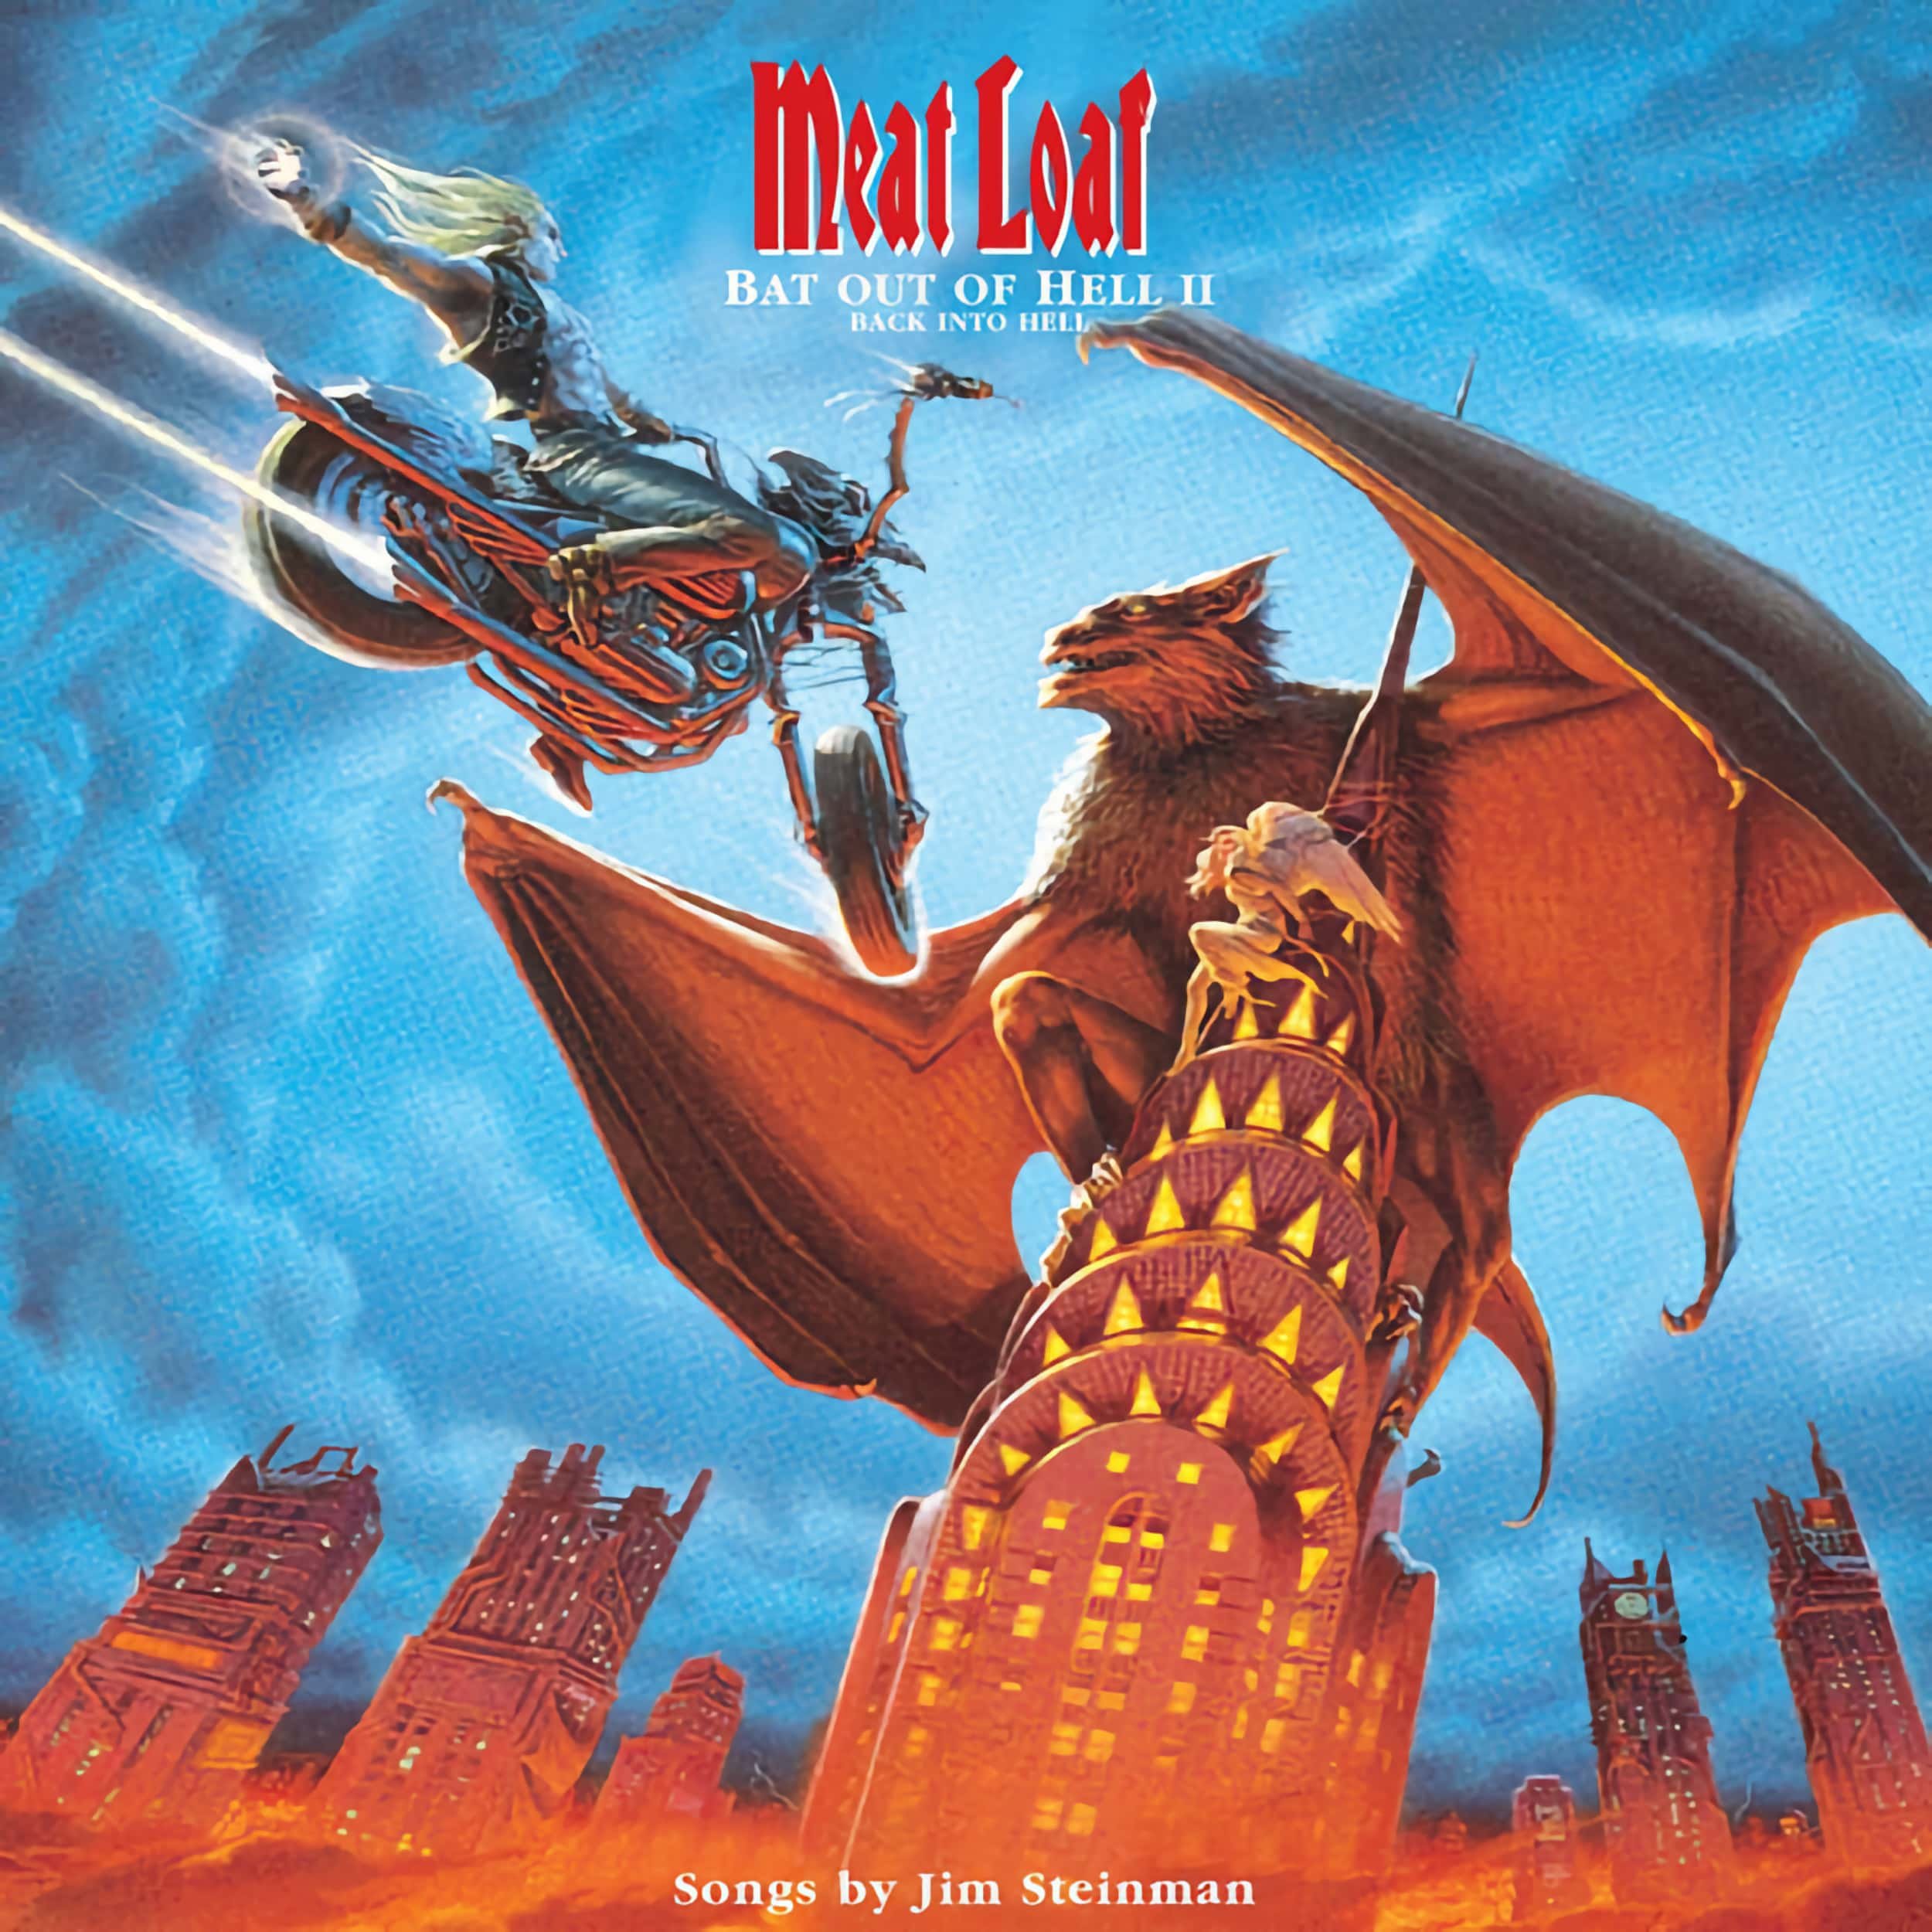 Bat Out of Hell II. Puntúa y comenta (no más de 3 palabras) Meat+Loaf+Bat+Out+Of+Hell+II+Album+Cover